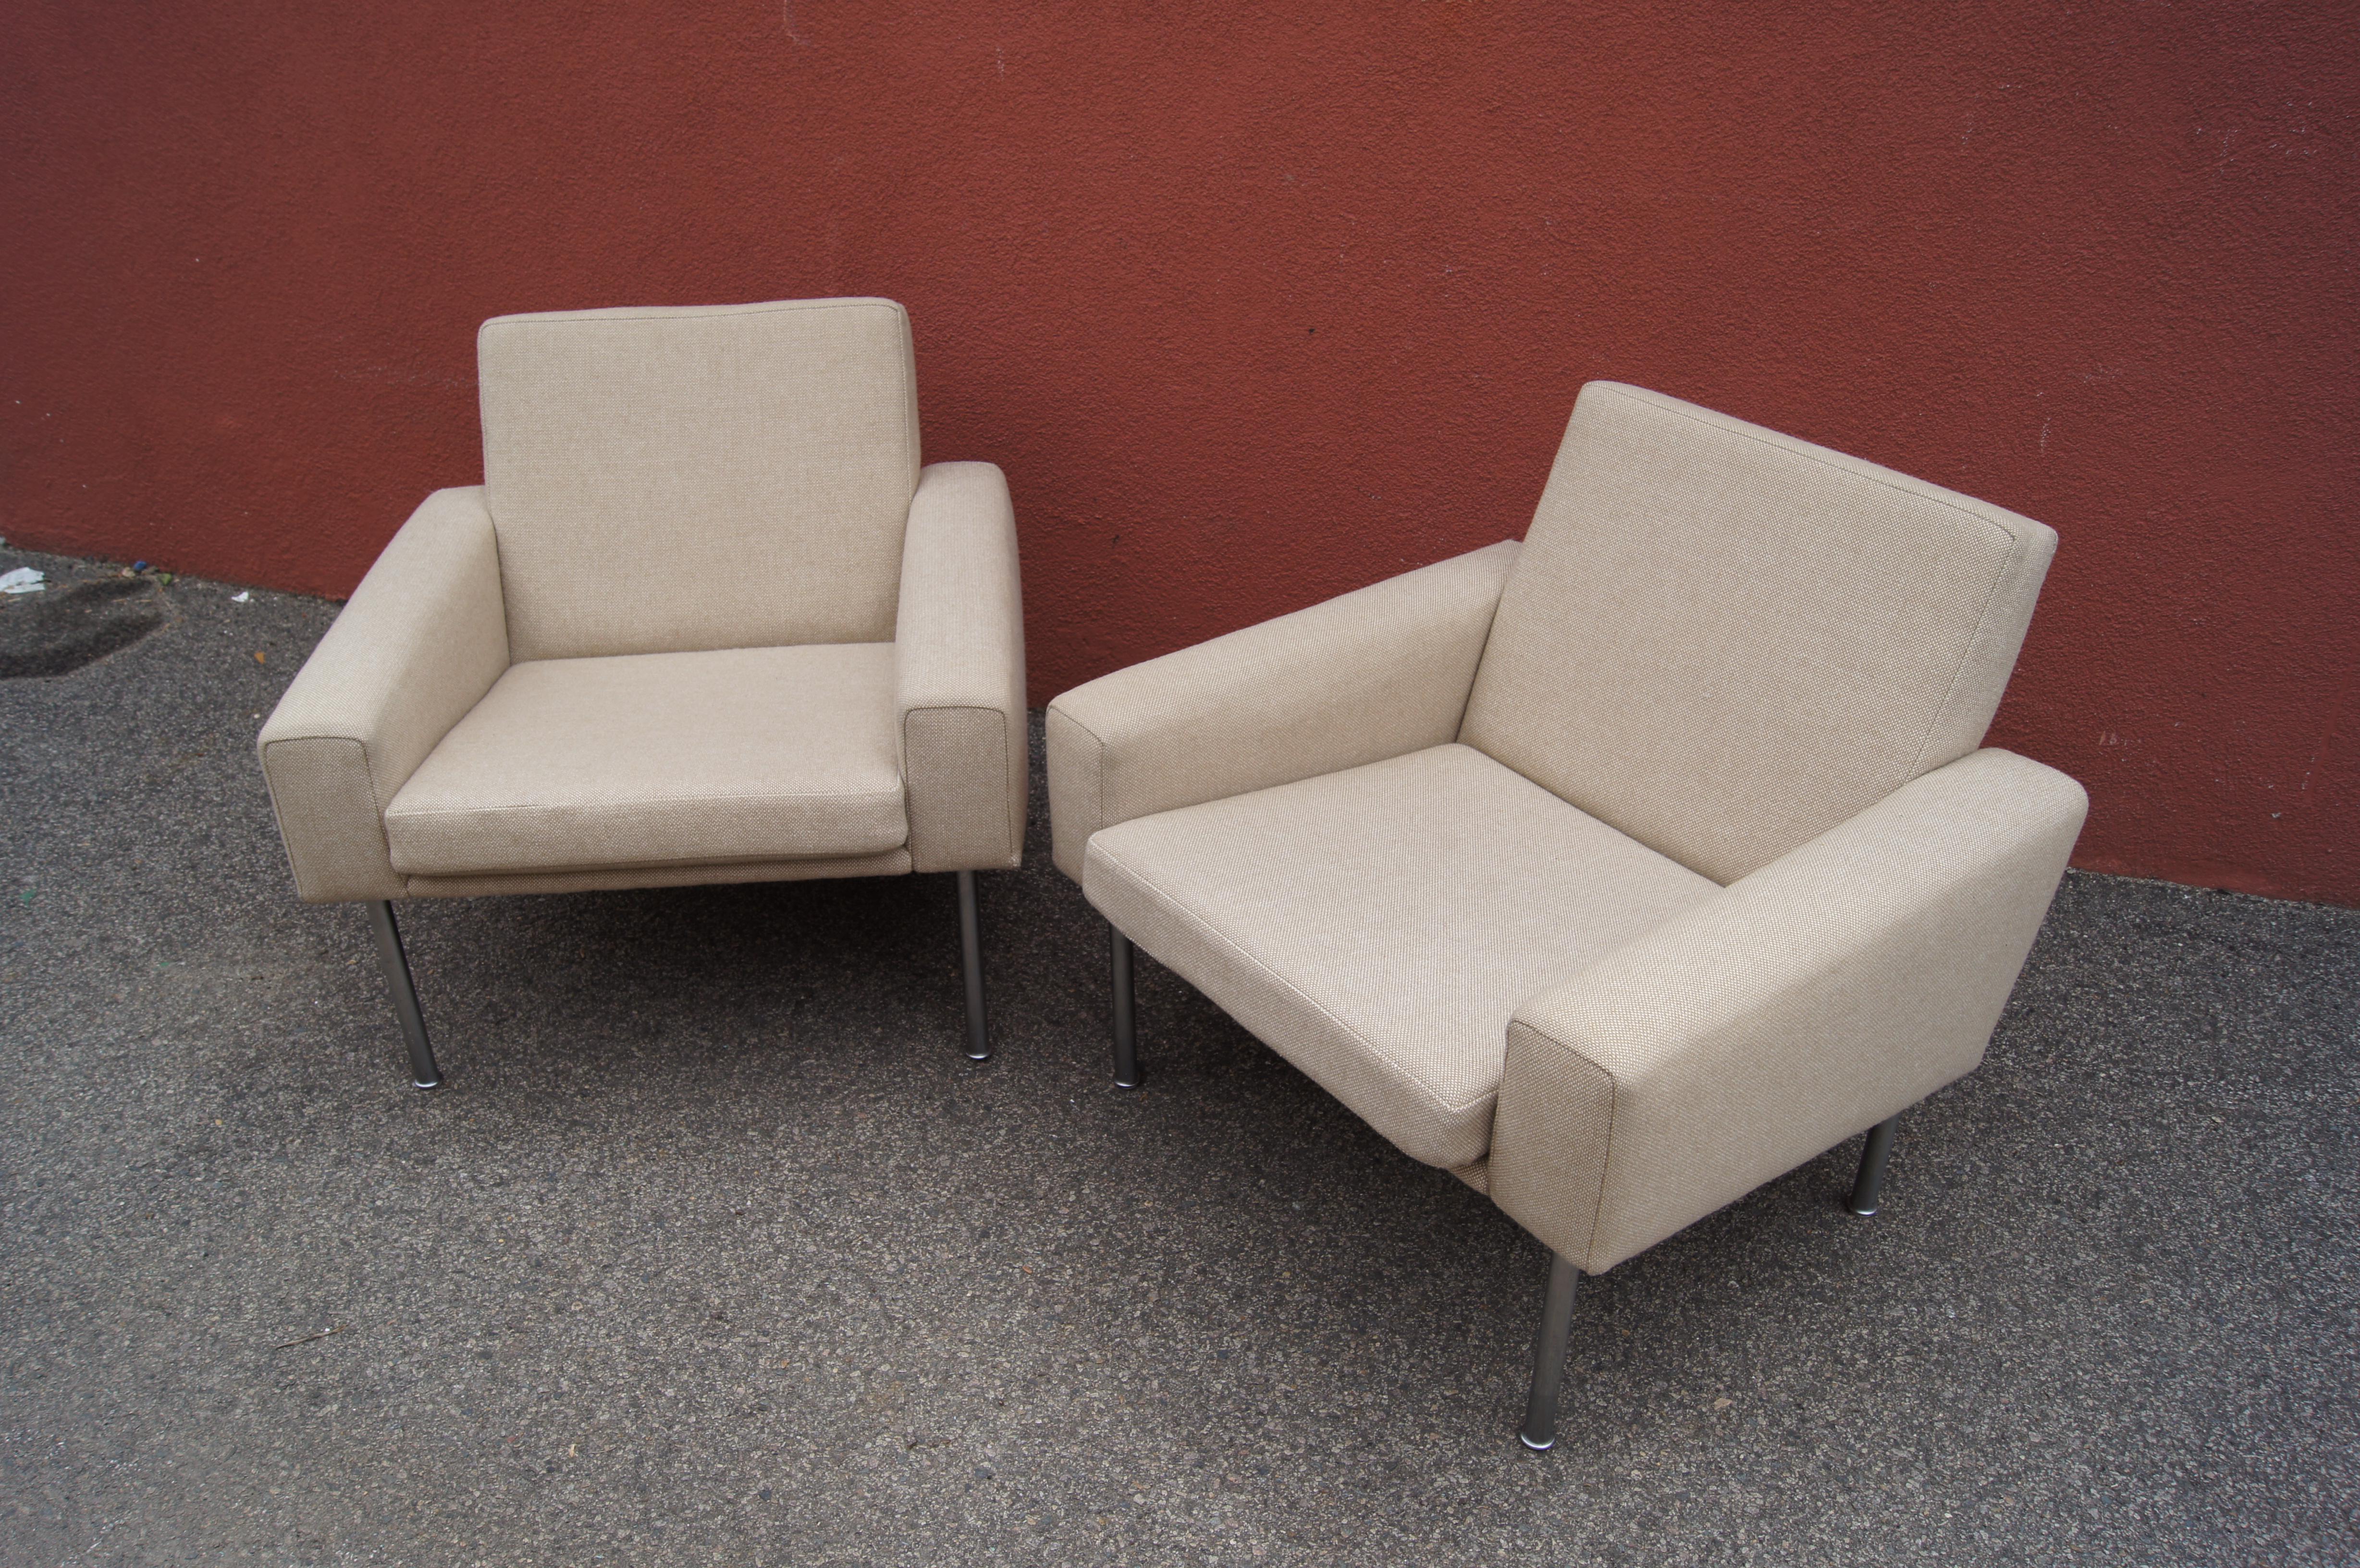 This pair of comfortable lounge chairs, model AP34/1, are part of a series that Hans Wegner designed for A.P. Stolen in 1957. Tubular legs of matte chrome-plated steel support a frame with dynamic lines, commodious seat, and wide armrests. The